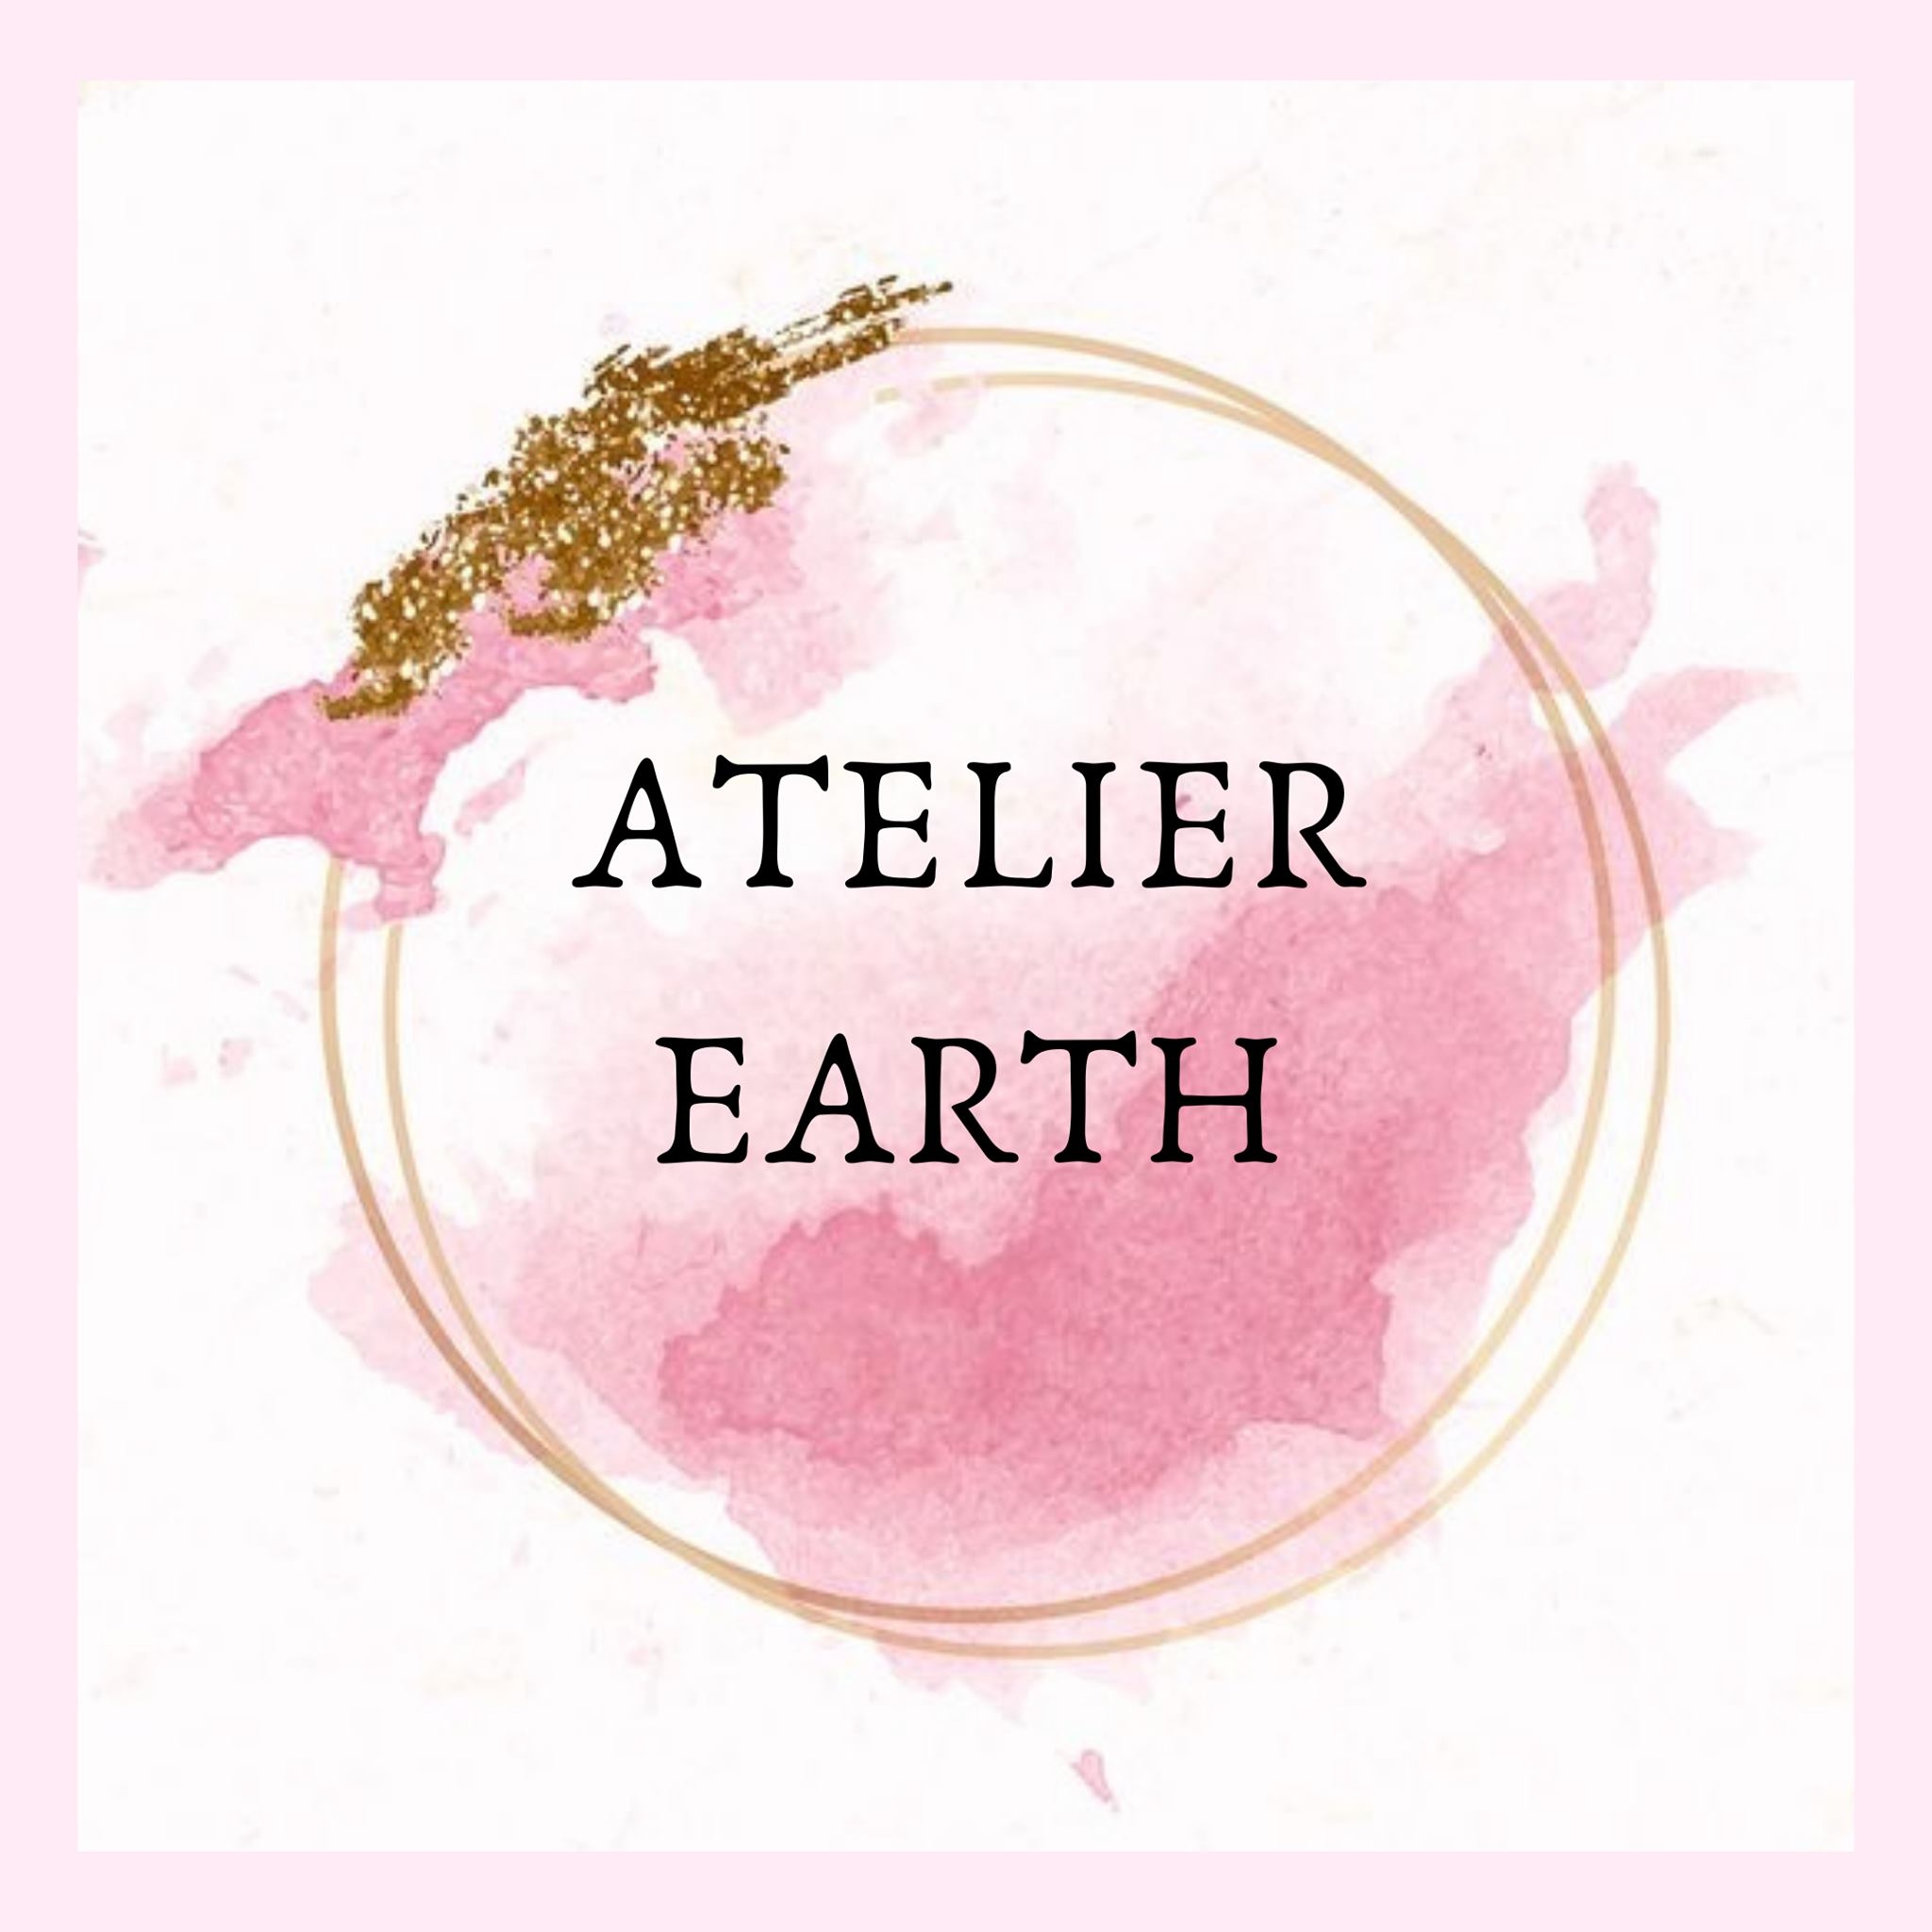 Atelier Earth|Legal Services|Professional Services